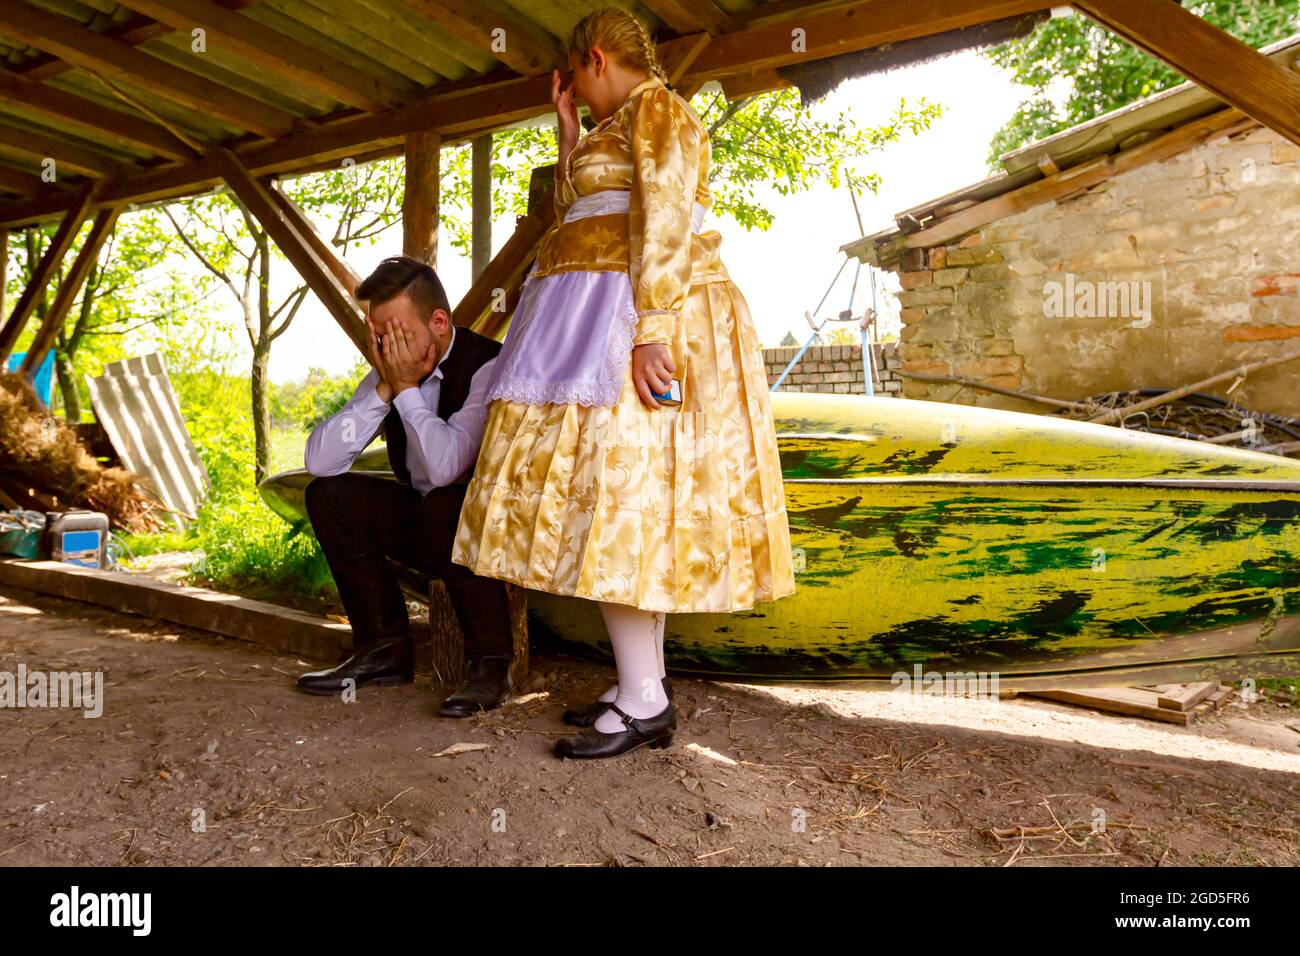 Ivanovo, Vojvodina, Serbia - April 17, 2016: Girl make jokes with young man who is sitting on wooden stump wearing a traditional folk costume in ancie Stock Photo